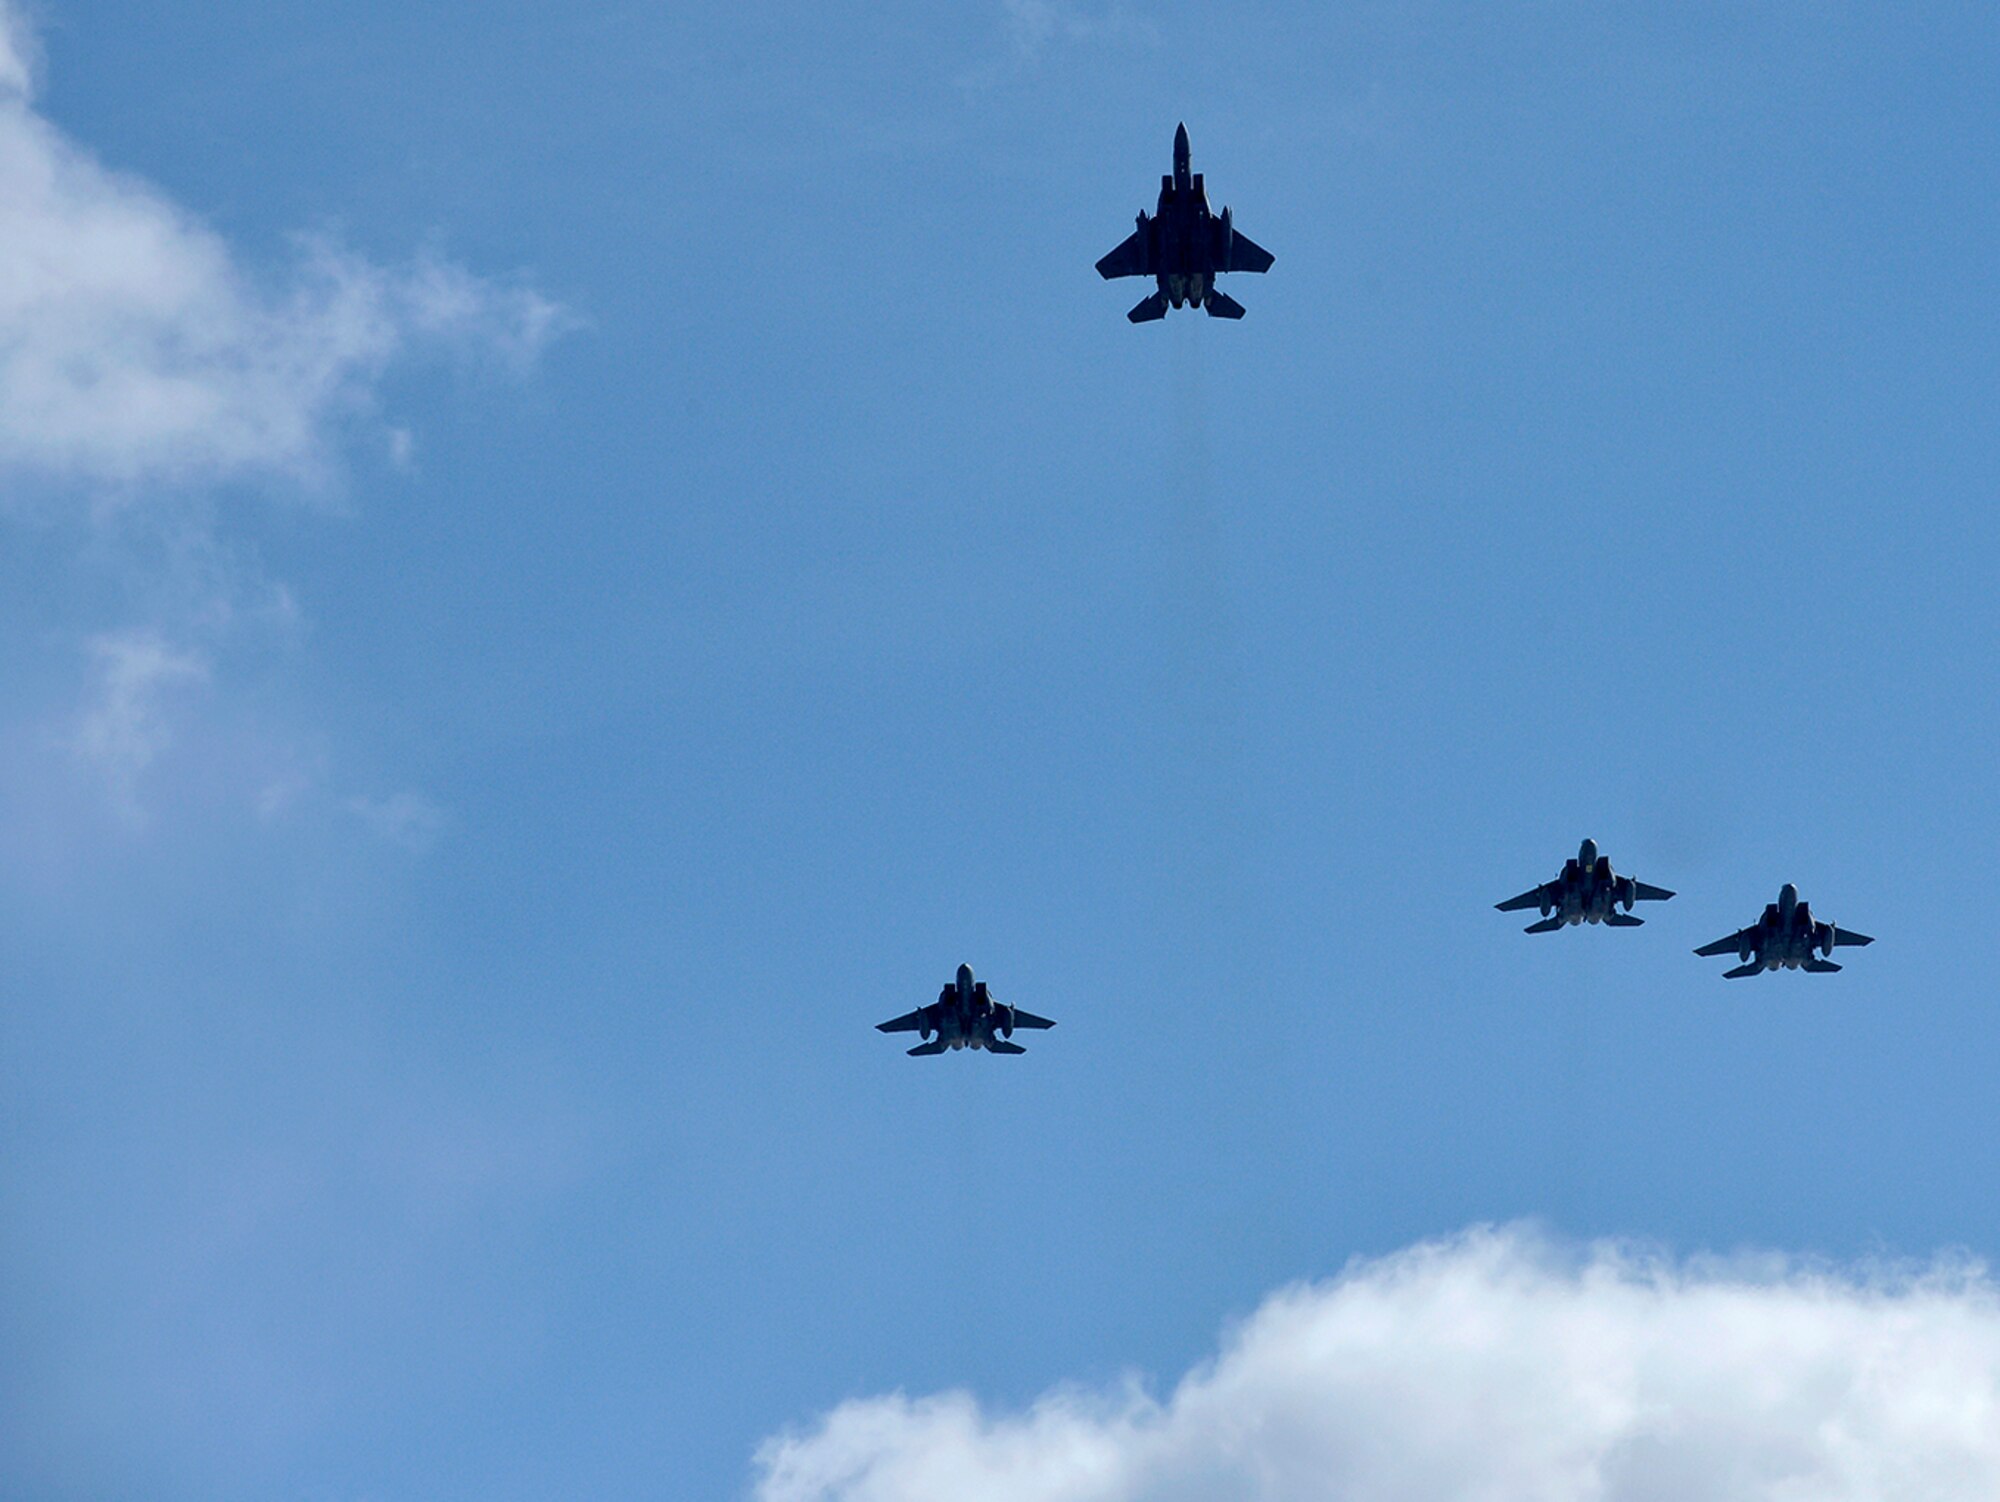 Four F-15E Strike Eagles from the 336th Fighter Squadron at Seymour-Johnson Air Force Base, N.C., fly over Arlington National Cemetery during the internment ceremony of Brig. Gen. Robinson "Robbie" Risner, Jan. 23, 2014. Risner was assigned to the squadron when he became the Air Force's 20th ace pilot during his time in Korea. Risner was one of the most celebrated pilots in Air Force history and survived seven and a half years of captivity in Hoa Lo Prison, a.k.a the Hanoi Hilton. (U.S. Air Force photo/Michael J. Pausic)